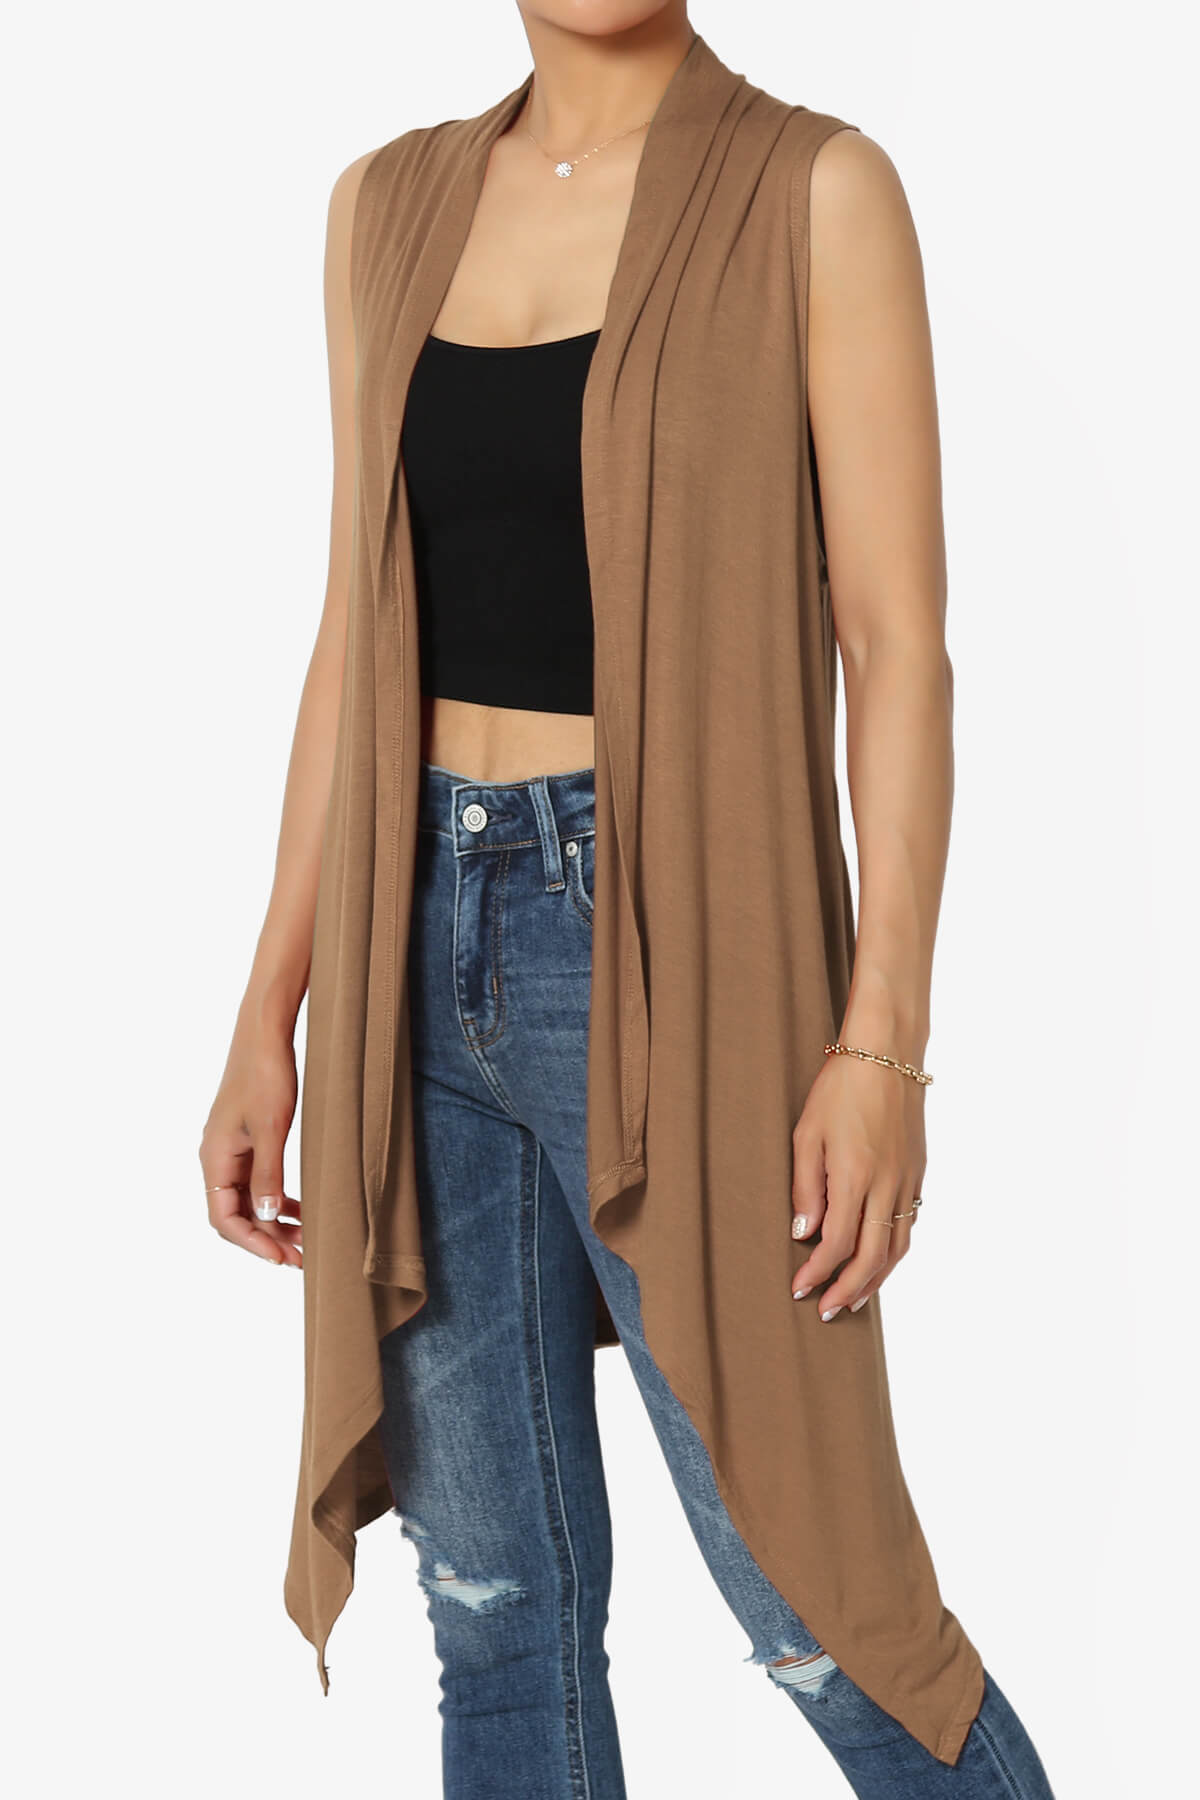 Load image into Gallery viewer, Taysom Draped Open Front Sleeveless Cardigan Vest DEEP CAMEL_3
